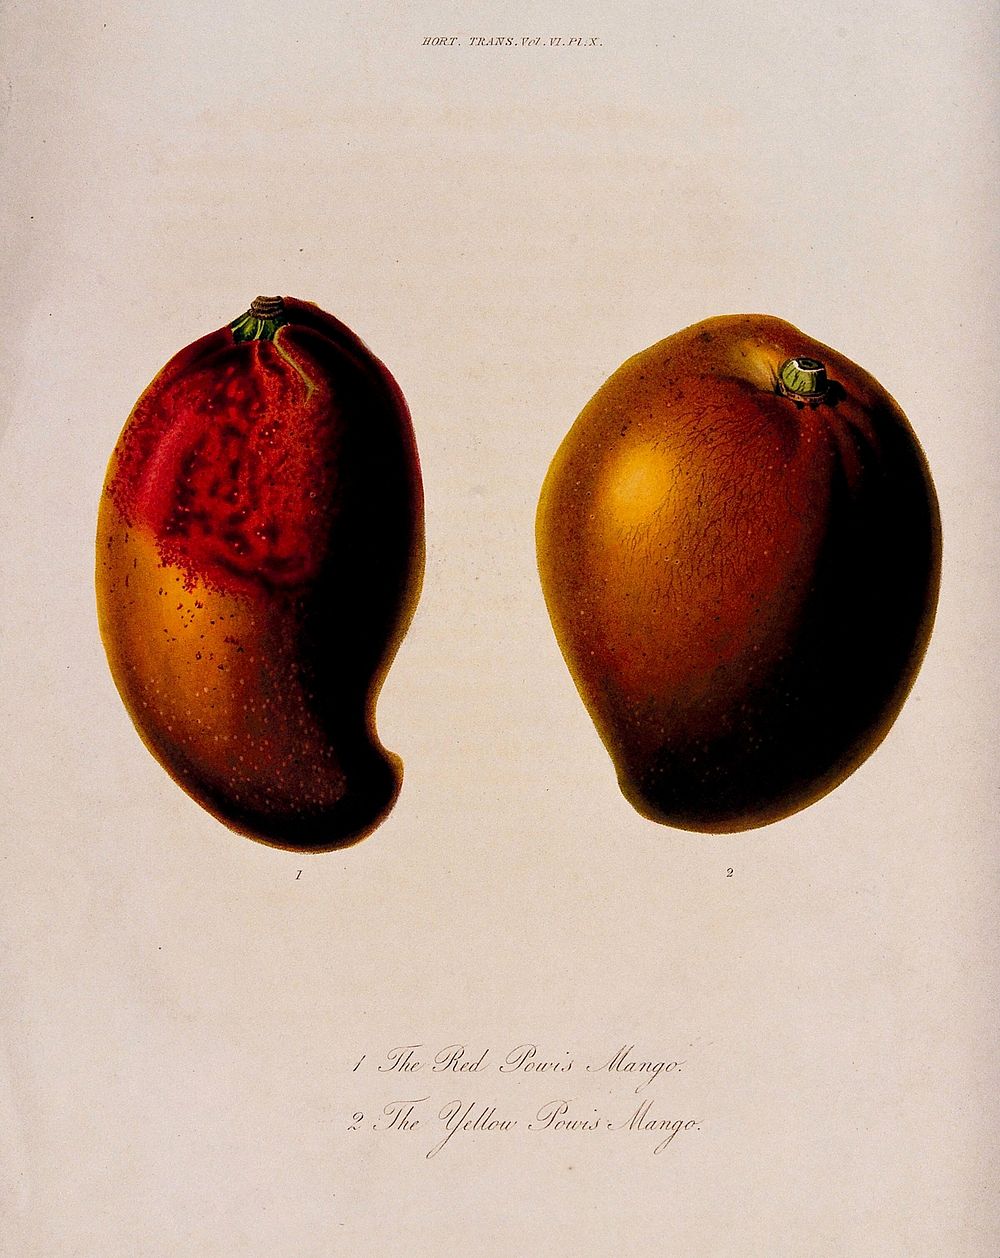 Two cultivars of mango (Mangifera indica cv.): entire fruits. Coloured etching by W. Clark, c. 1830, after Mrs. Withers.